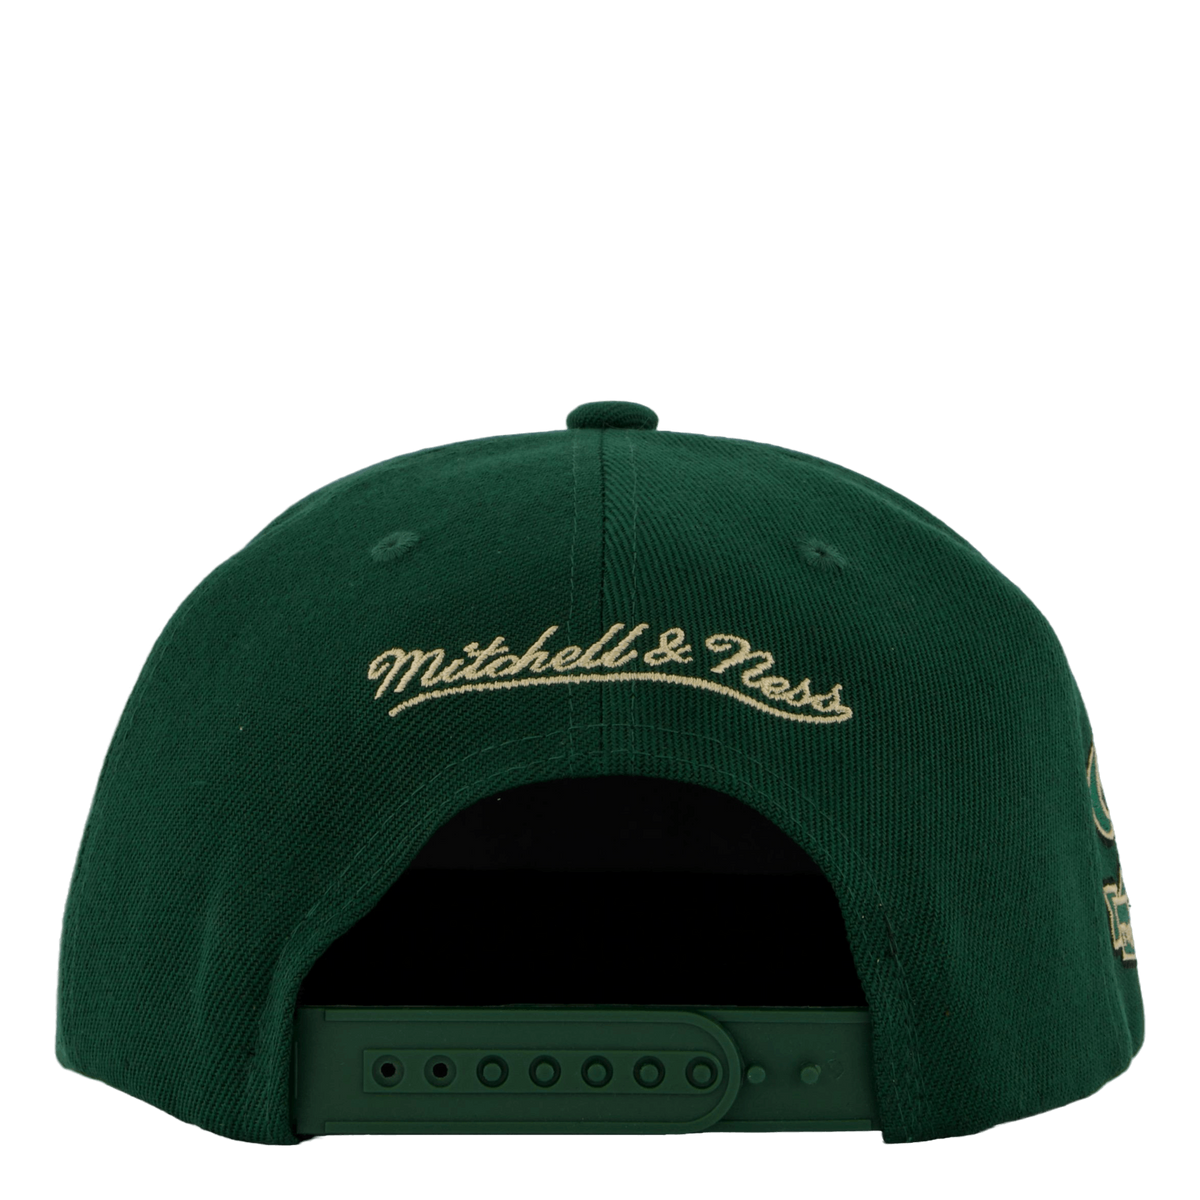 With Love Snapback Green